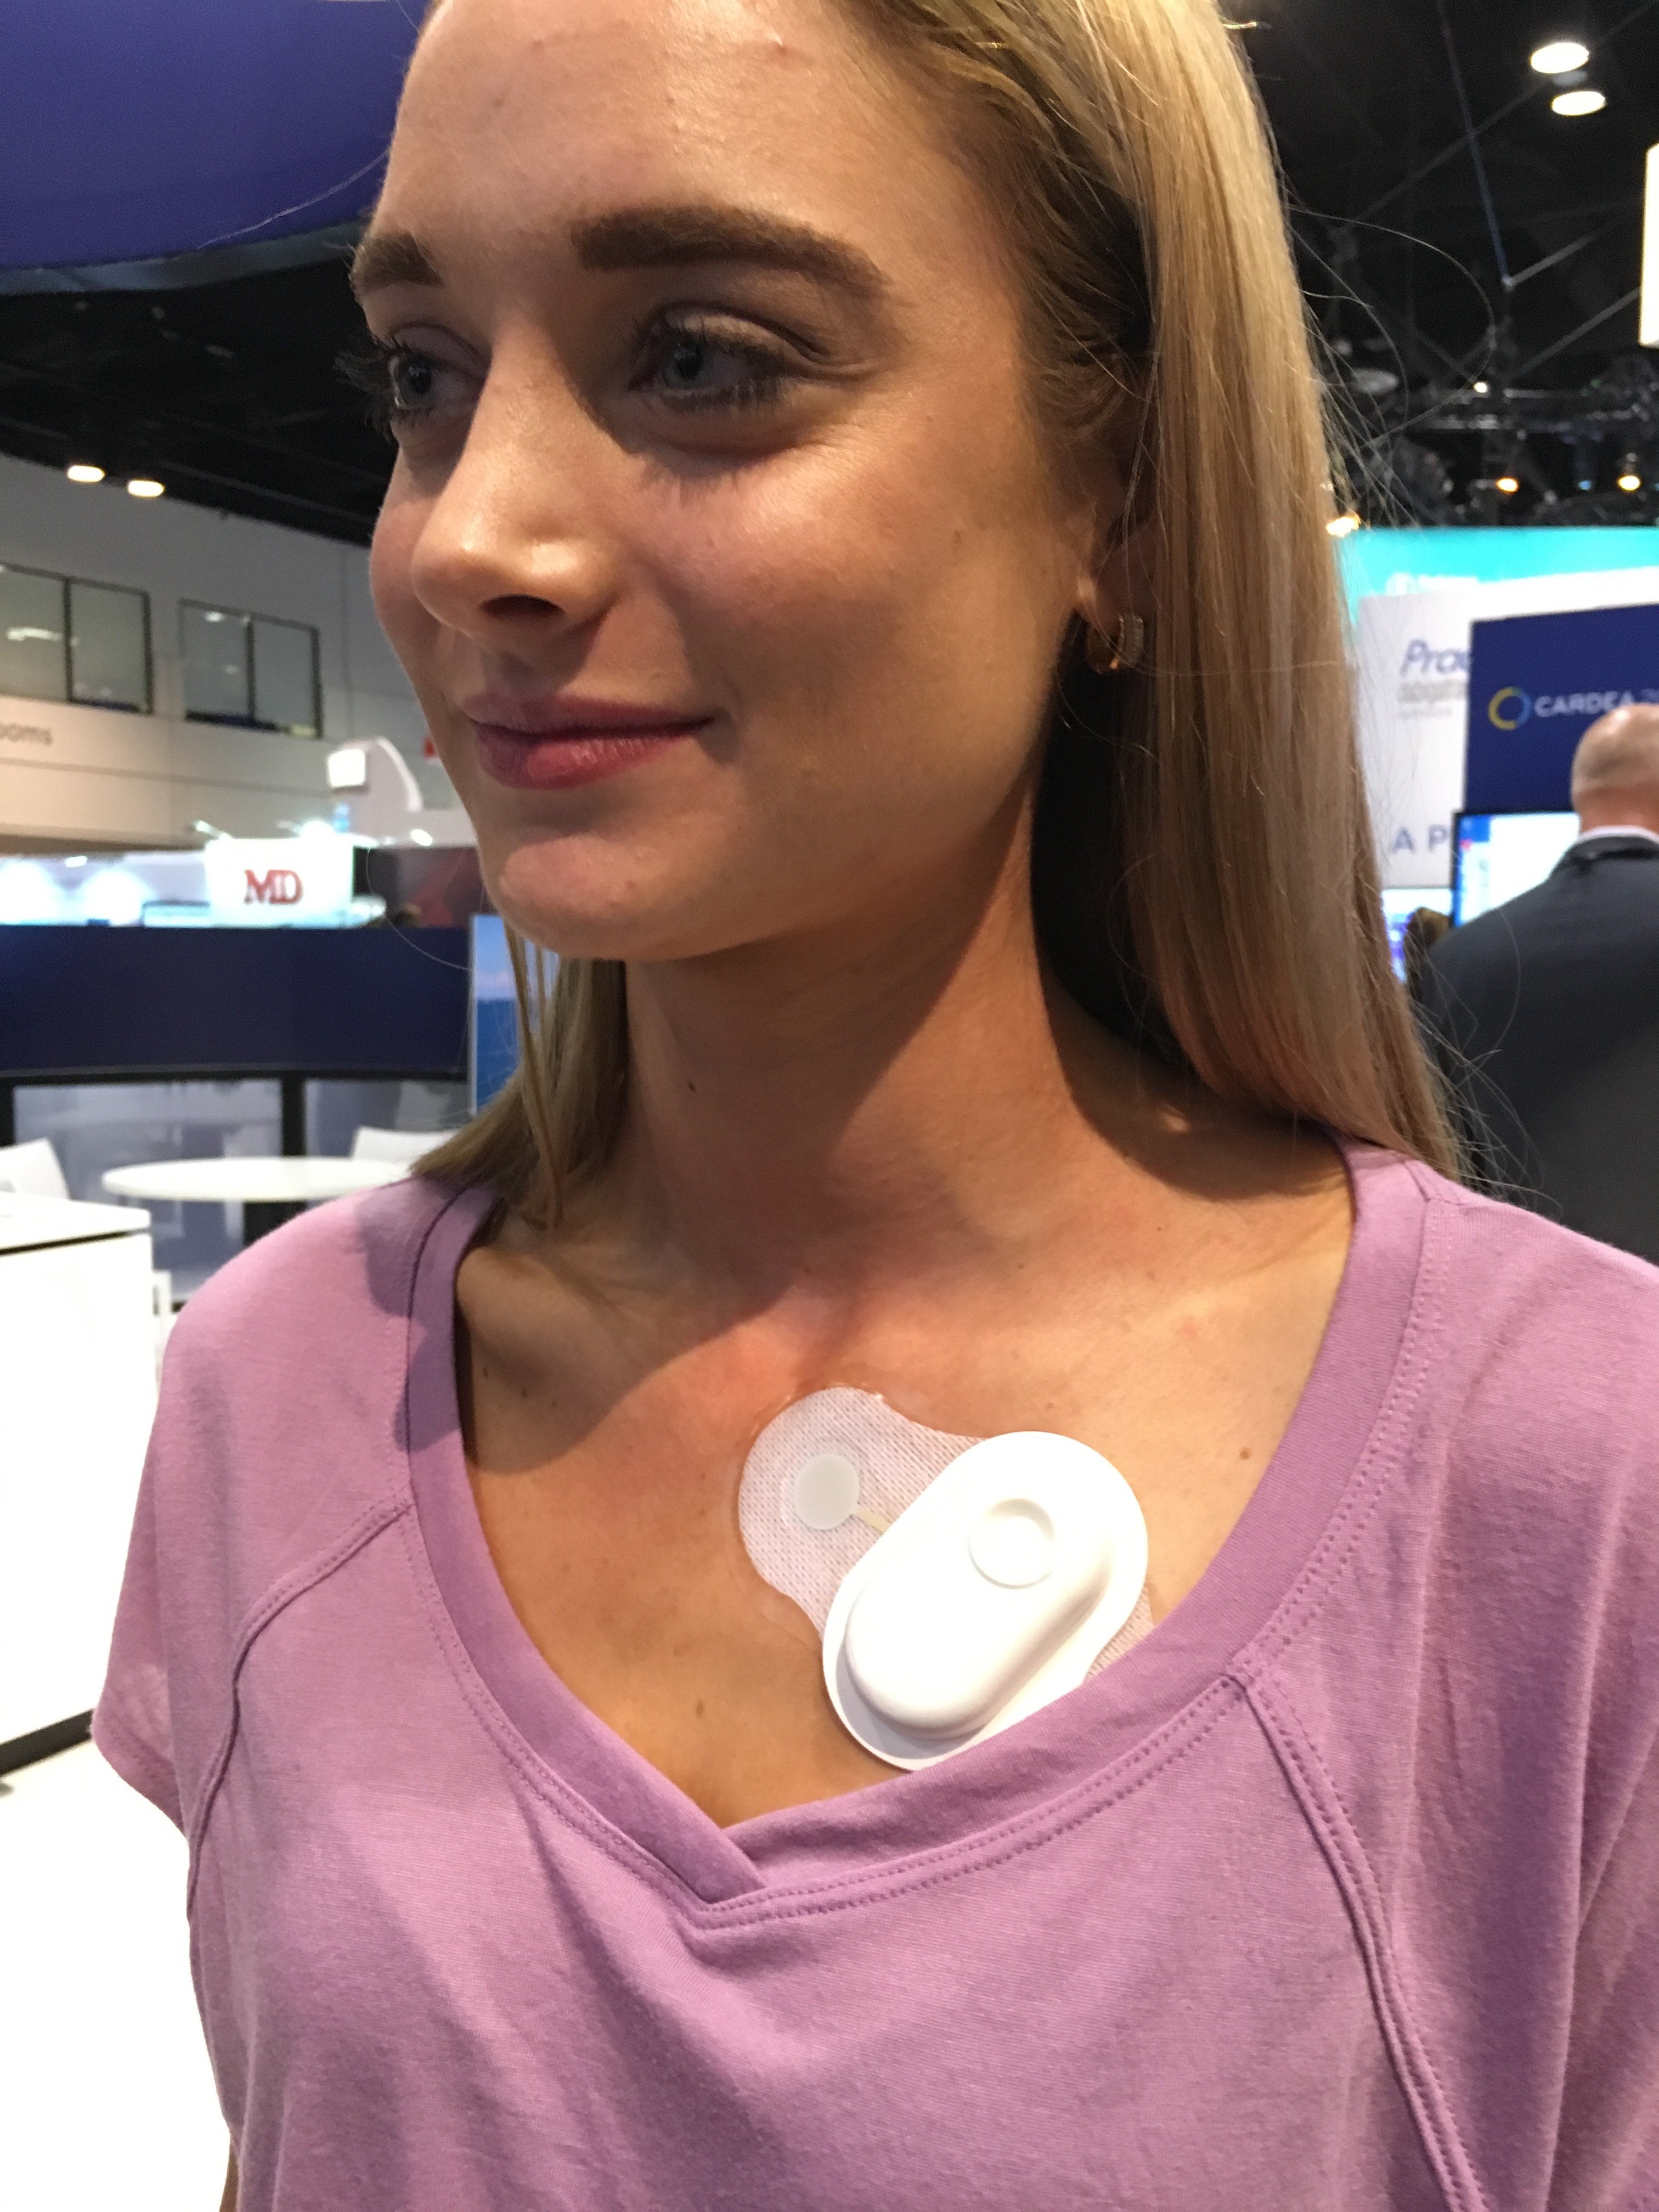 Belt with sensors monitors heart parameters 24/7 - Today's Medical